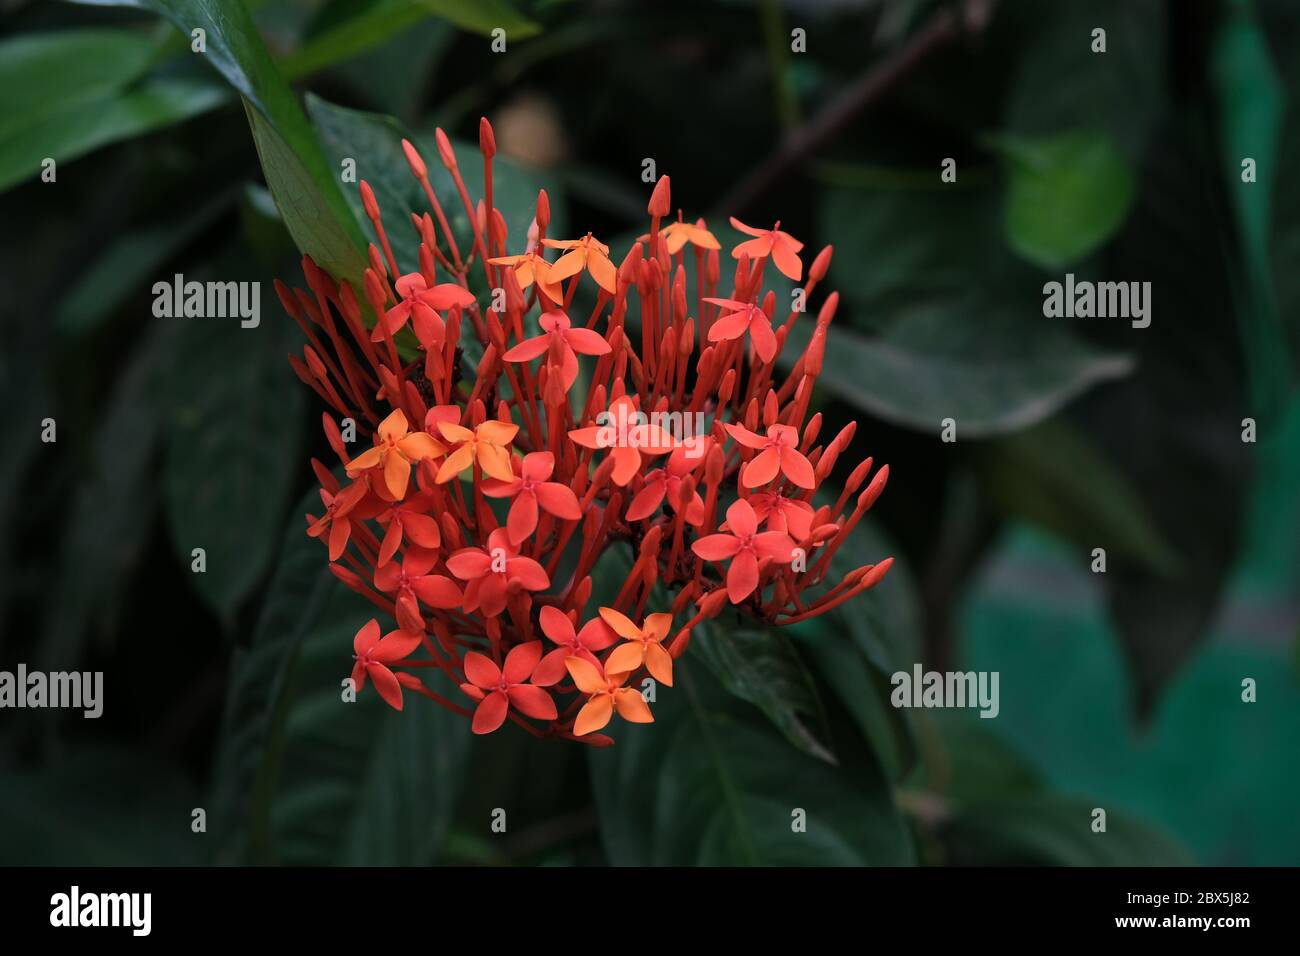 Ixora is a genus of flowering plants in the family Rubiaceae. Stock Photo